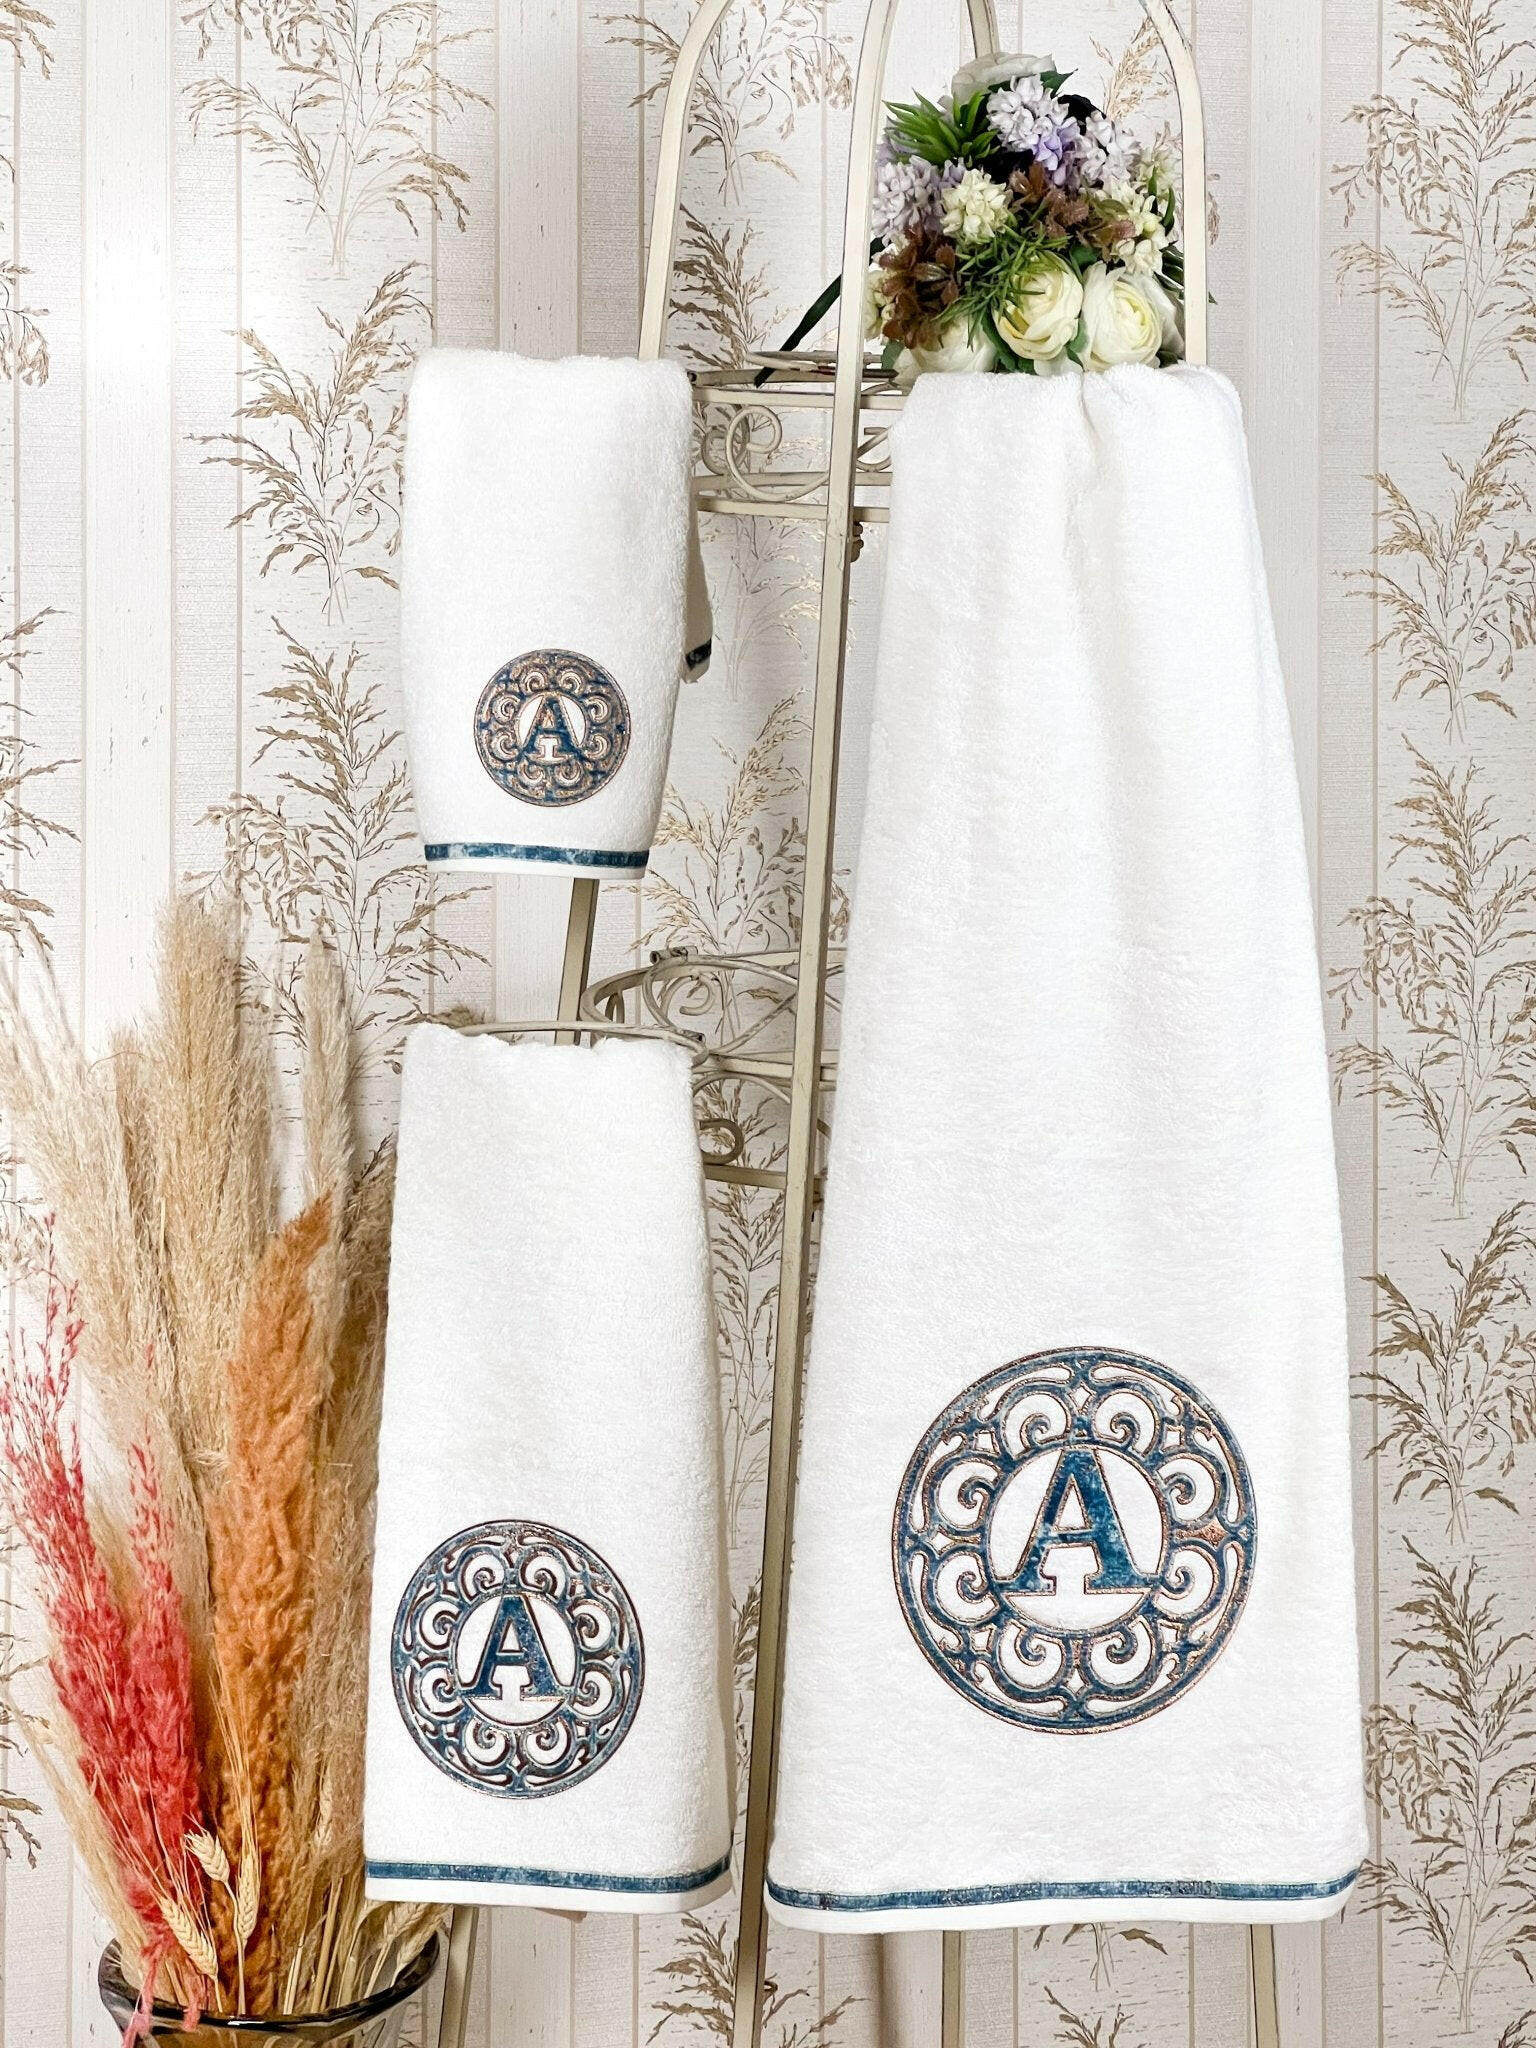 Personalized Lyra Towel Set with Monogrammed Initials, Bath Towel Set